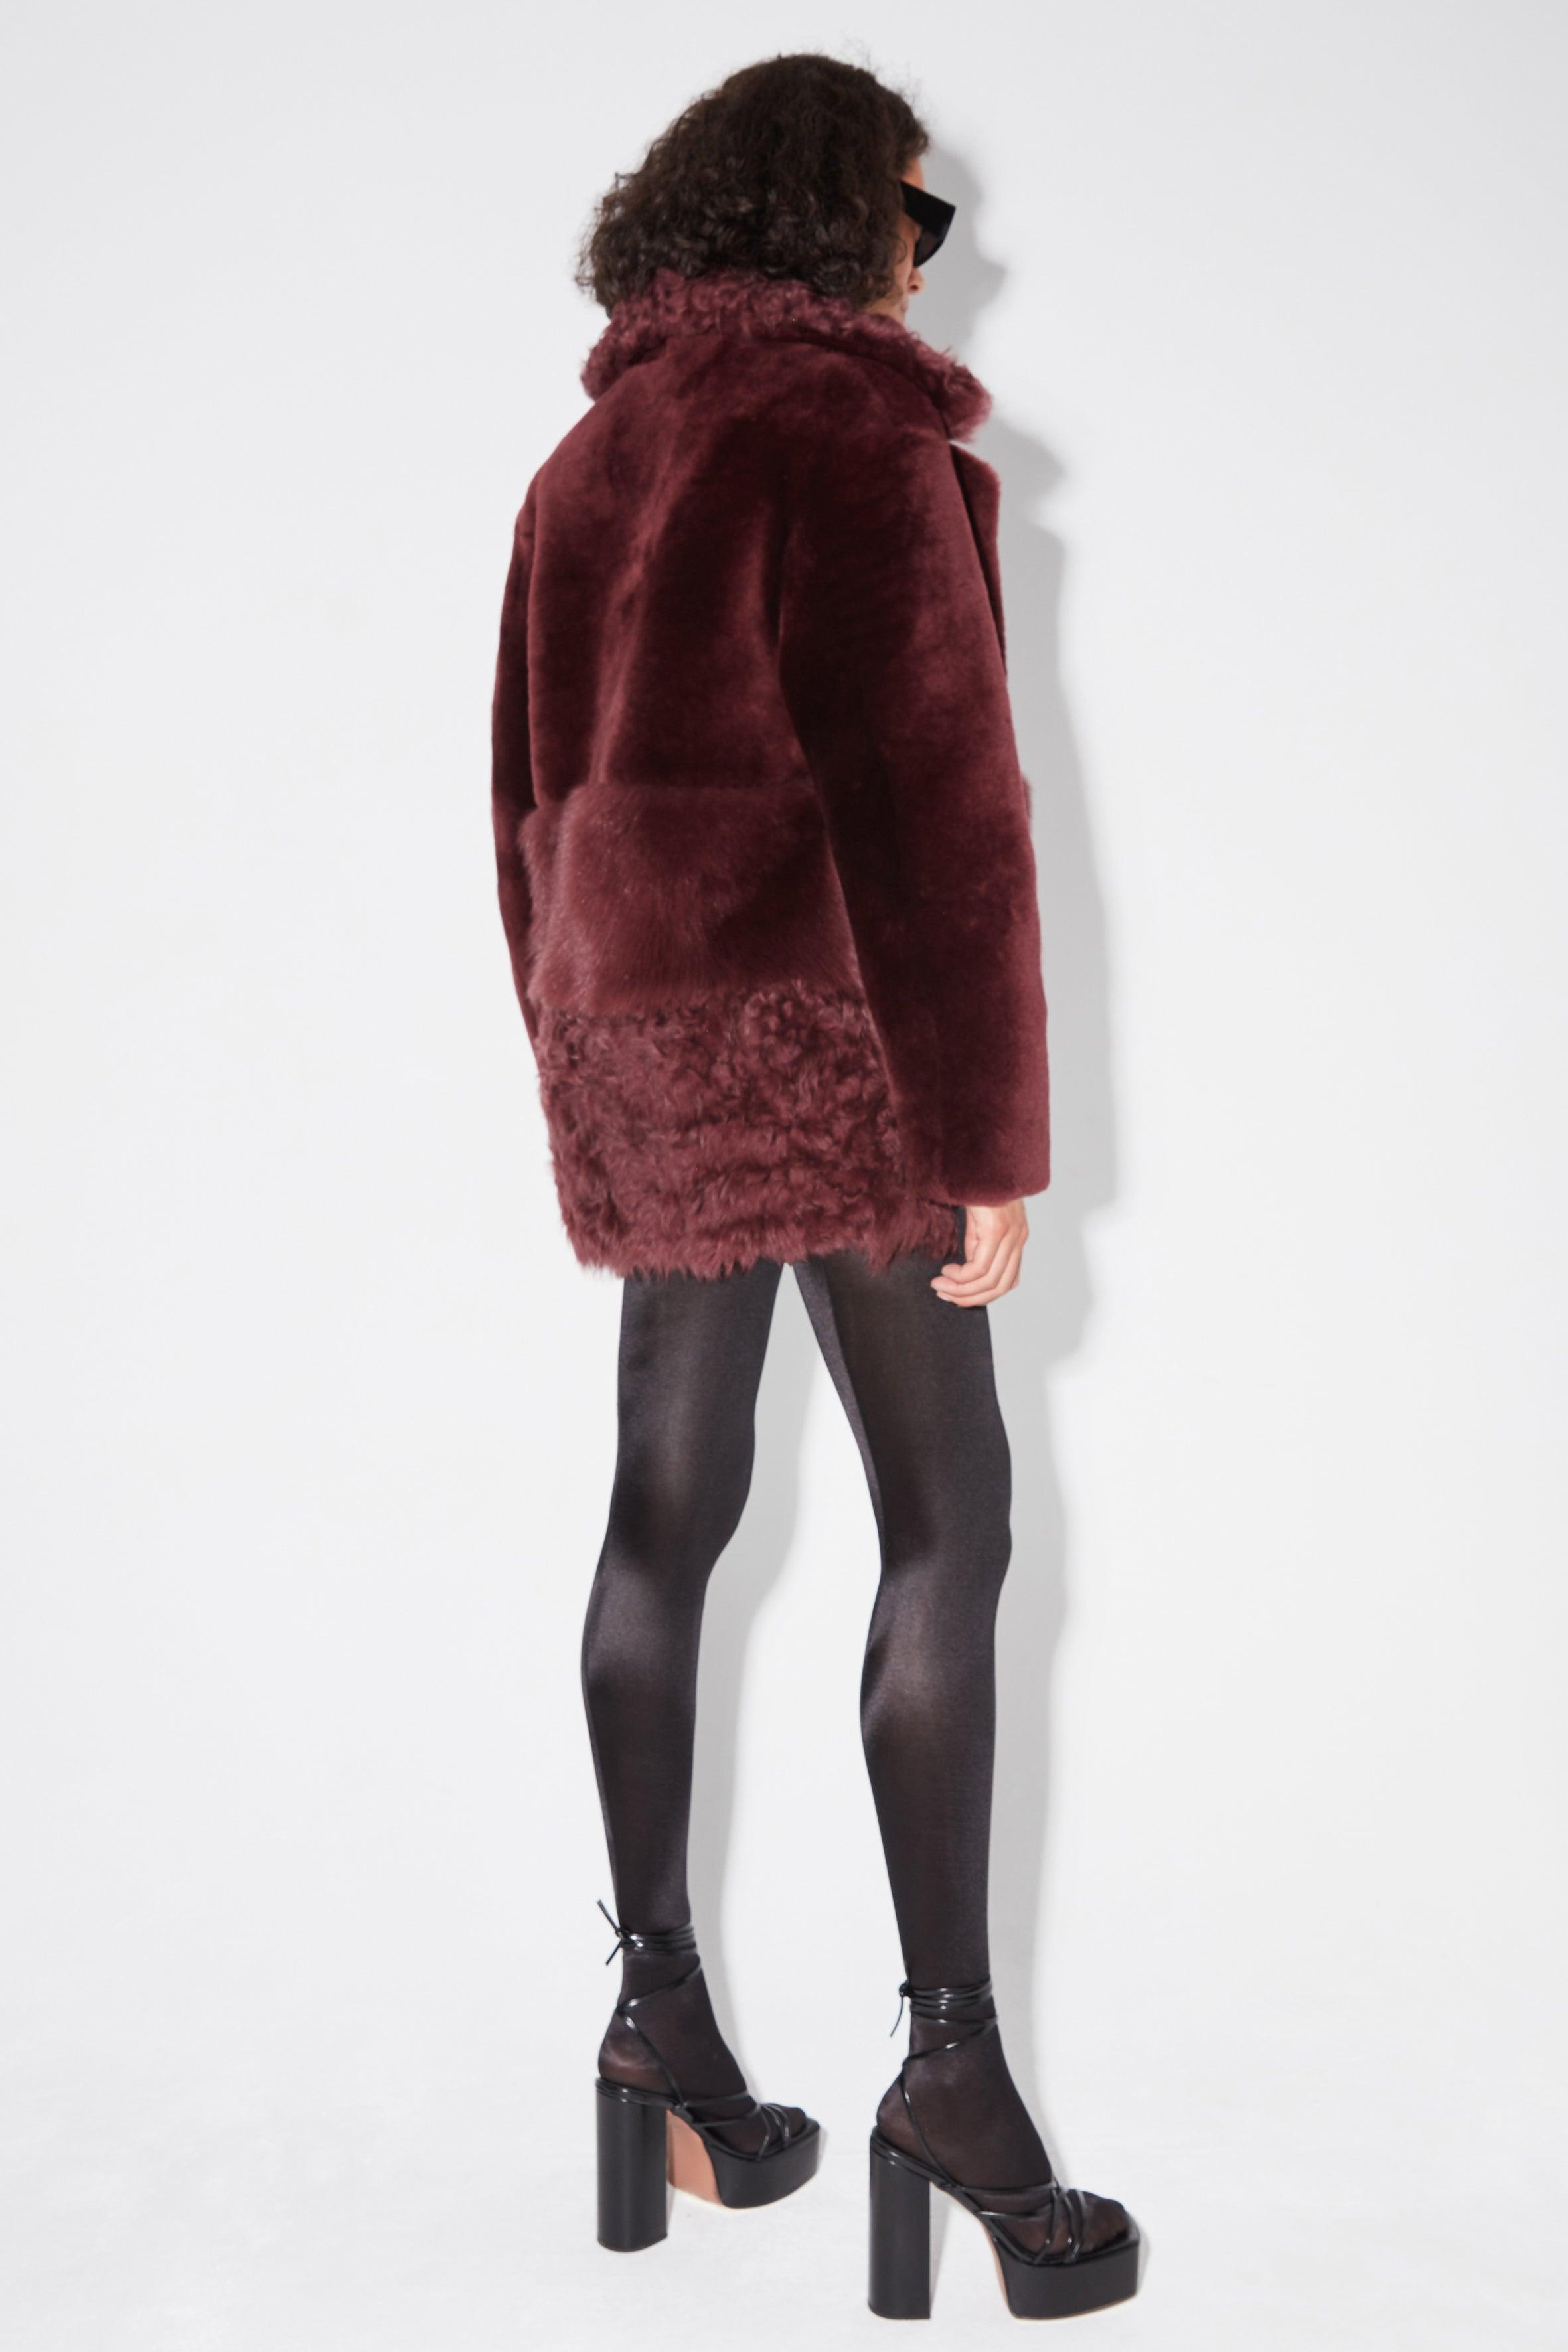 Model is wearing the Anouk Mulberry Luxurious Shearling Coat Back